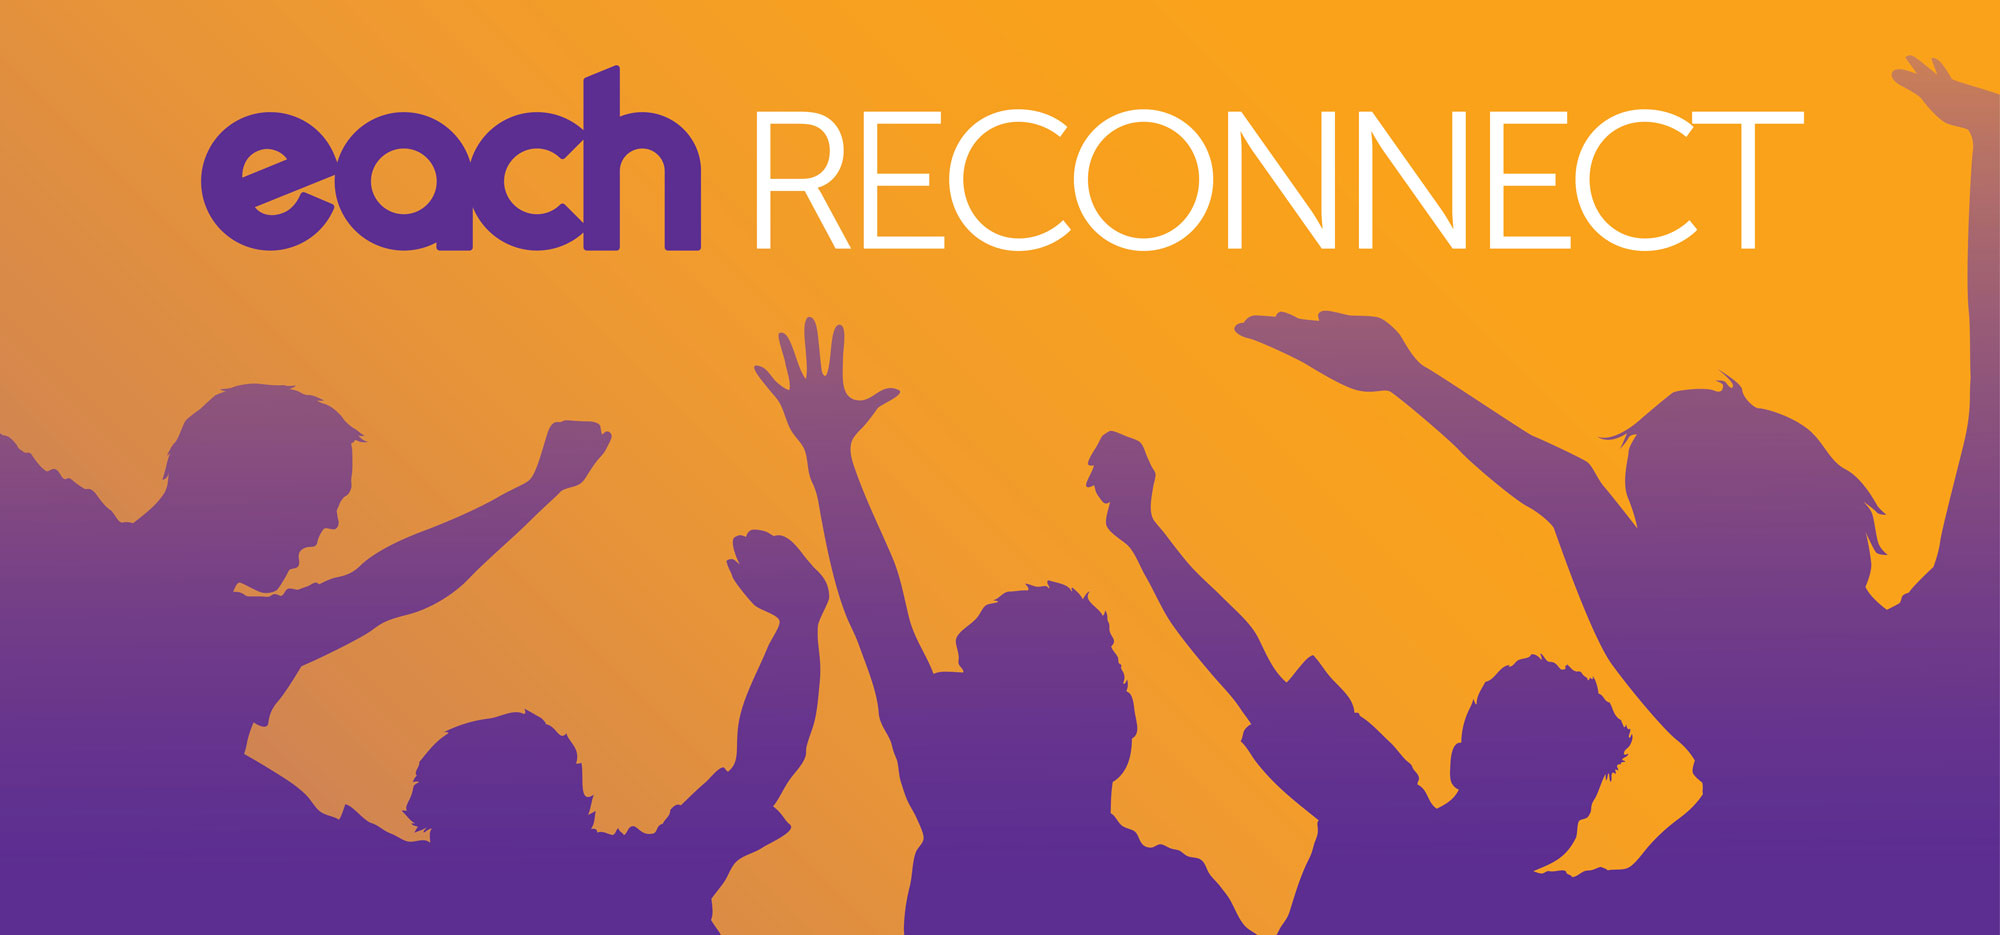 Reconnect NSW - EACH